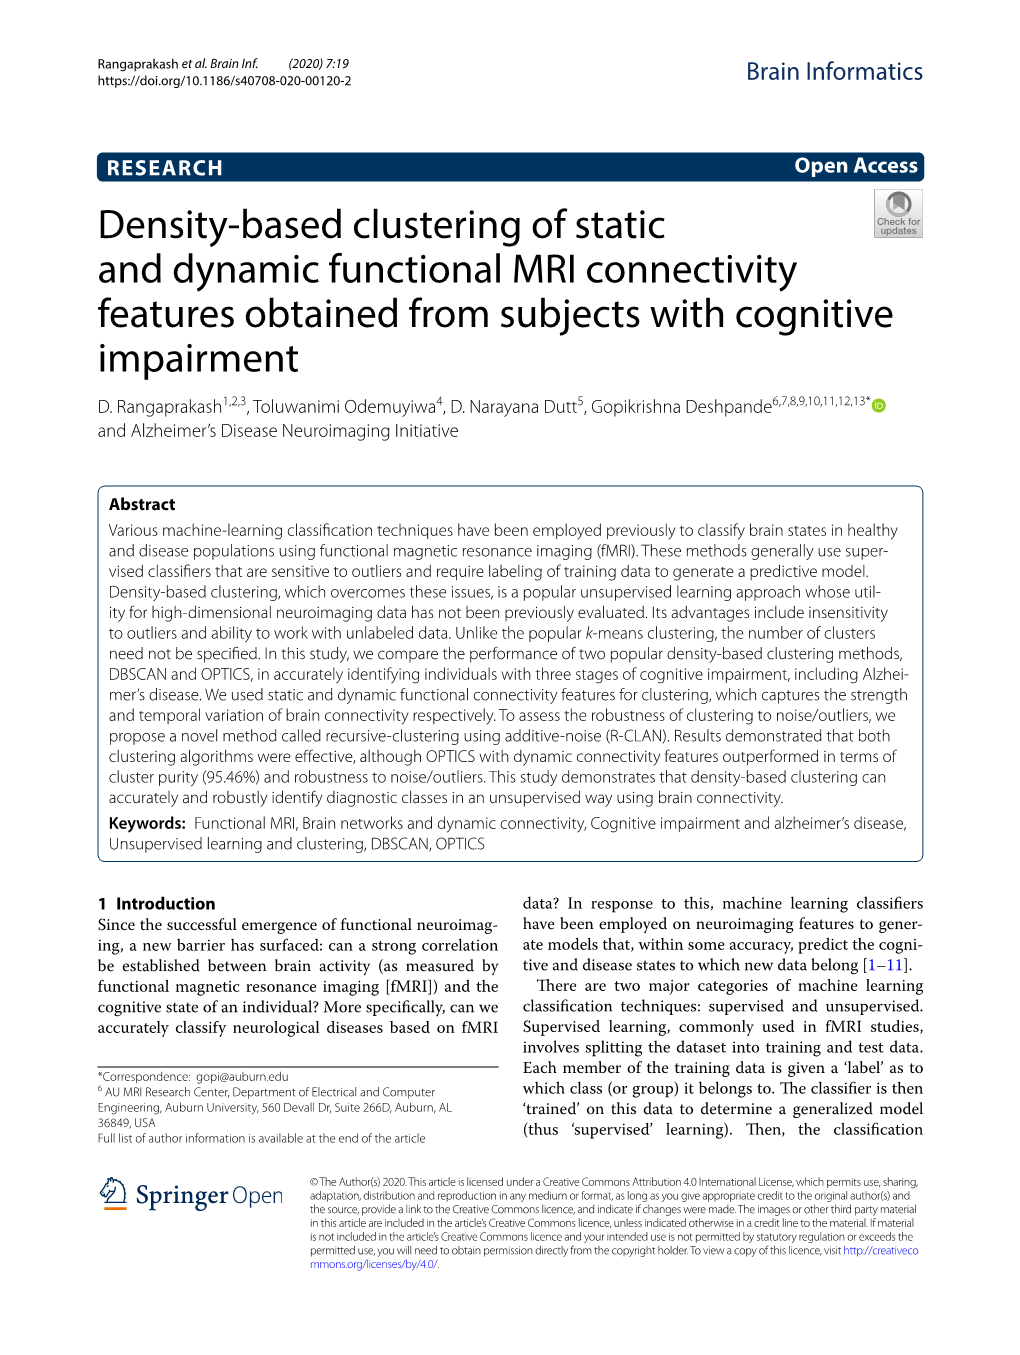 Density-Based Clustering of Static and Dynamic Functional MRI Connectivity